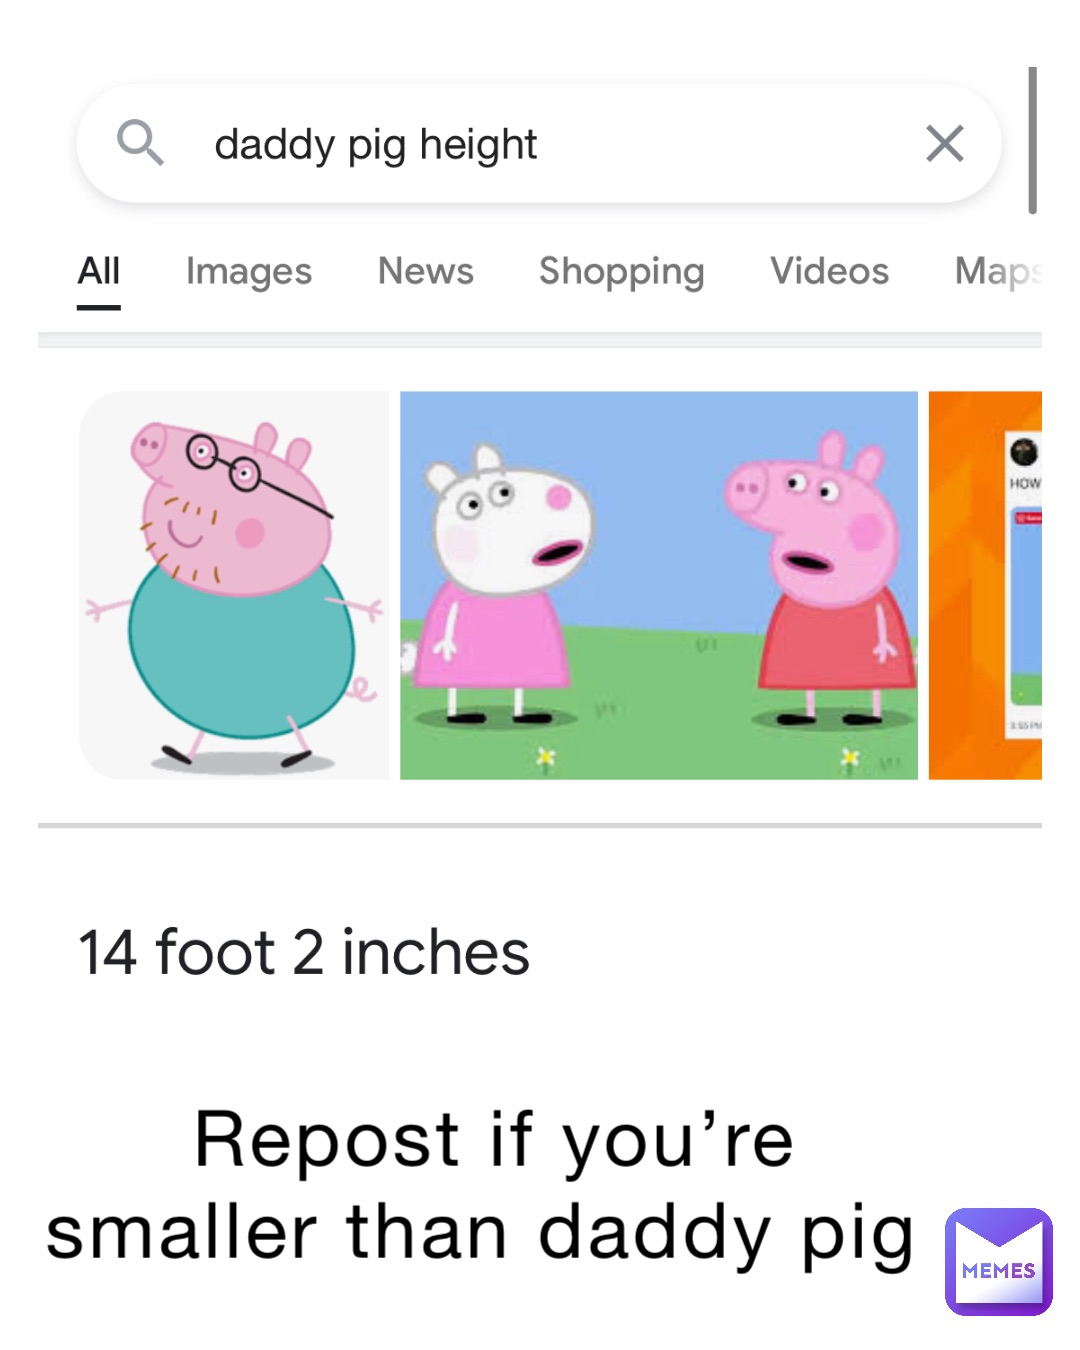 Repost if you’re smaller than Daddy Pig